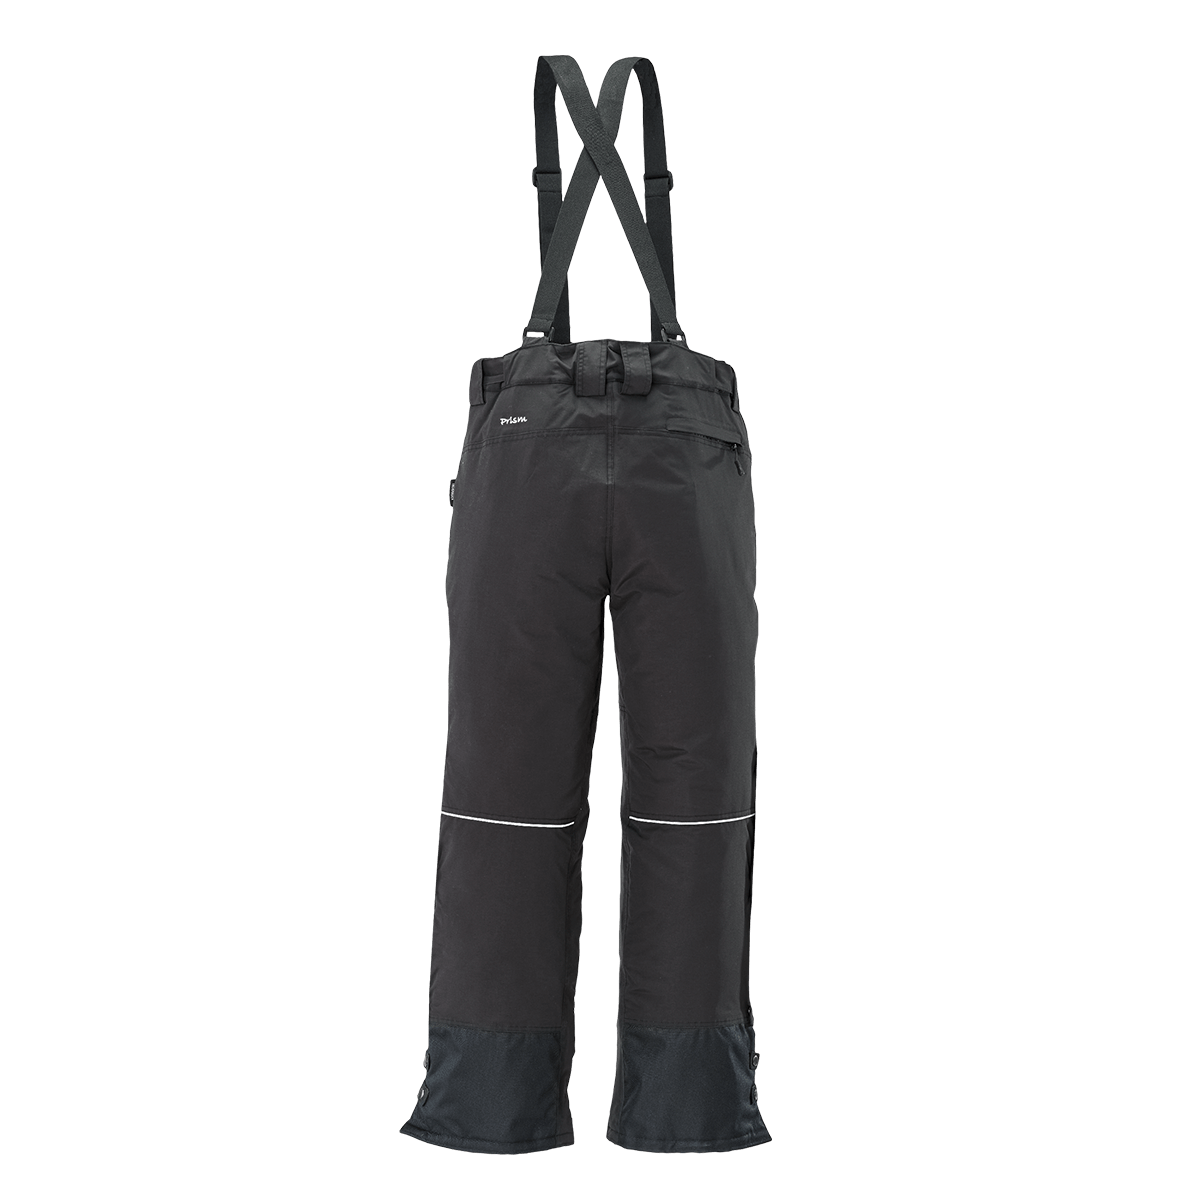 Back View Product Image of StrikerICE Women's Prism Pant